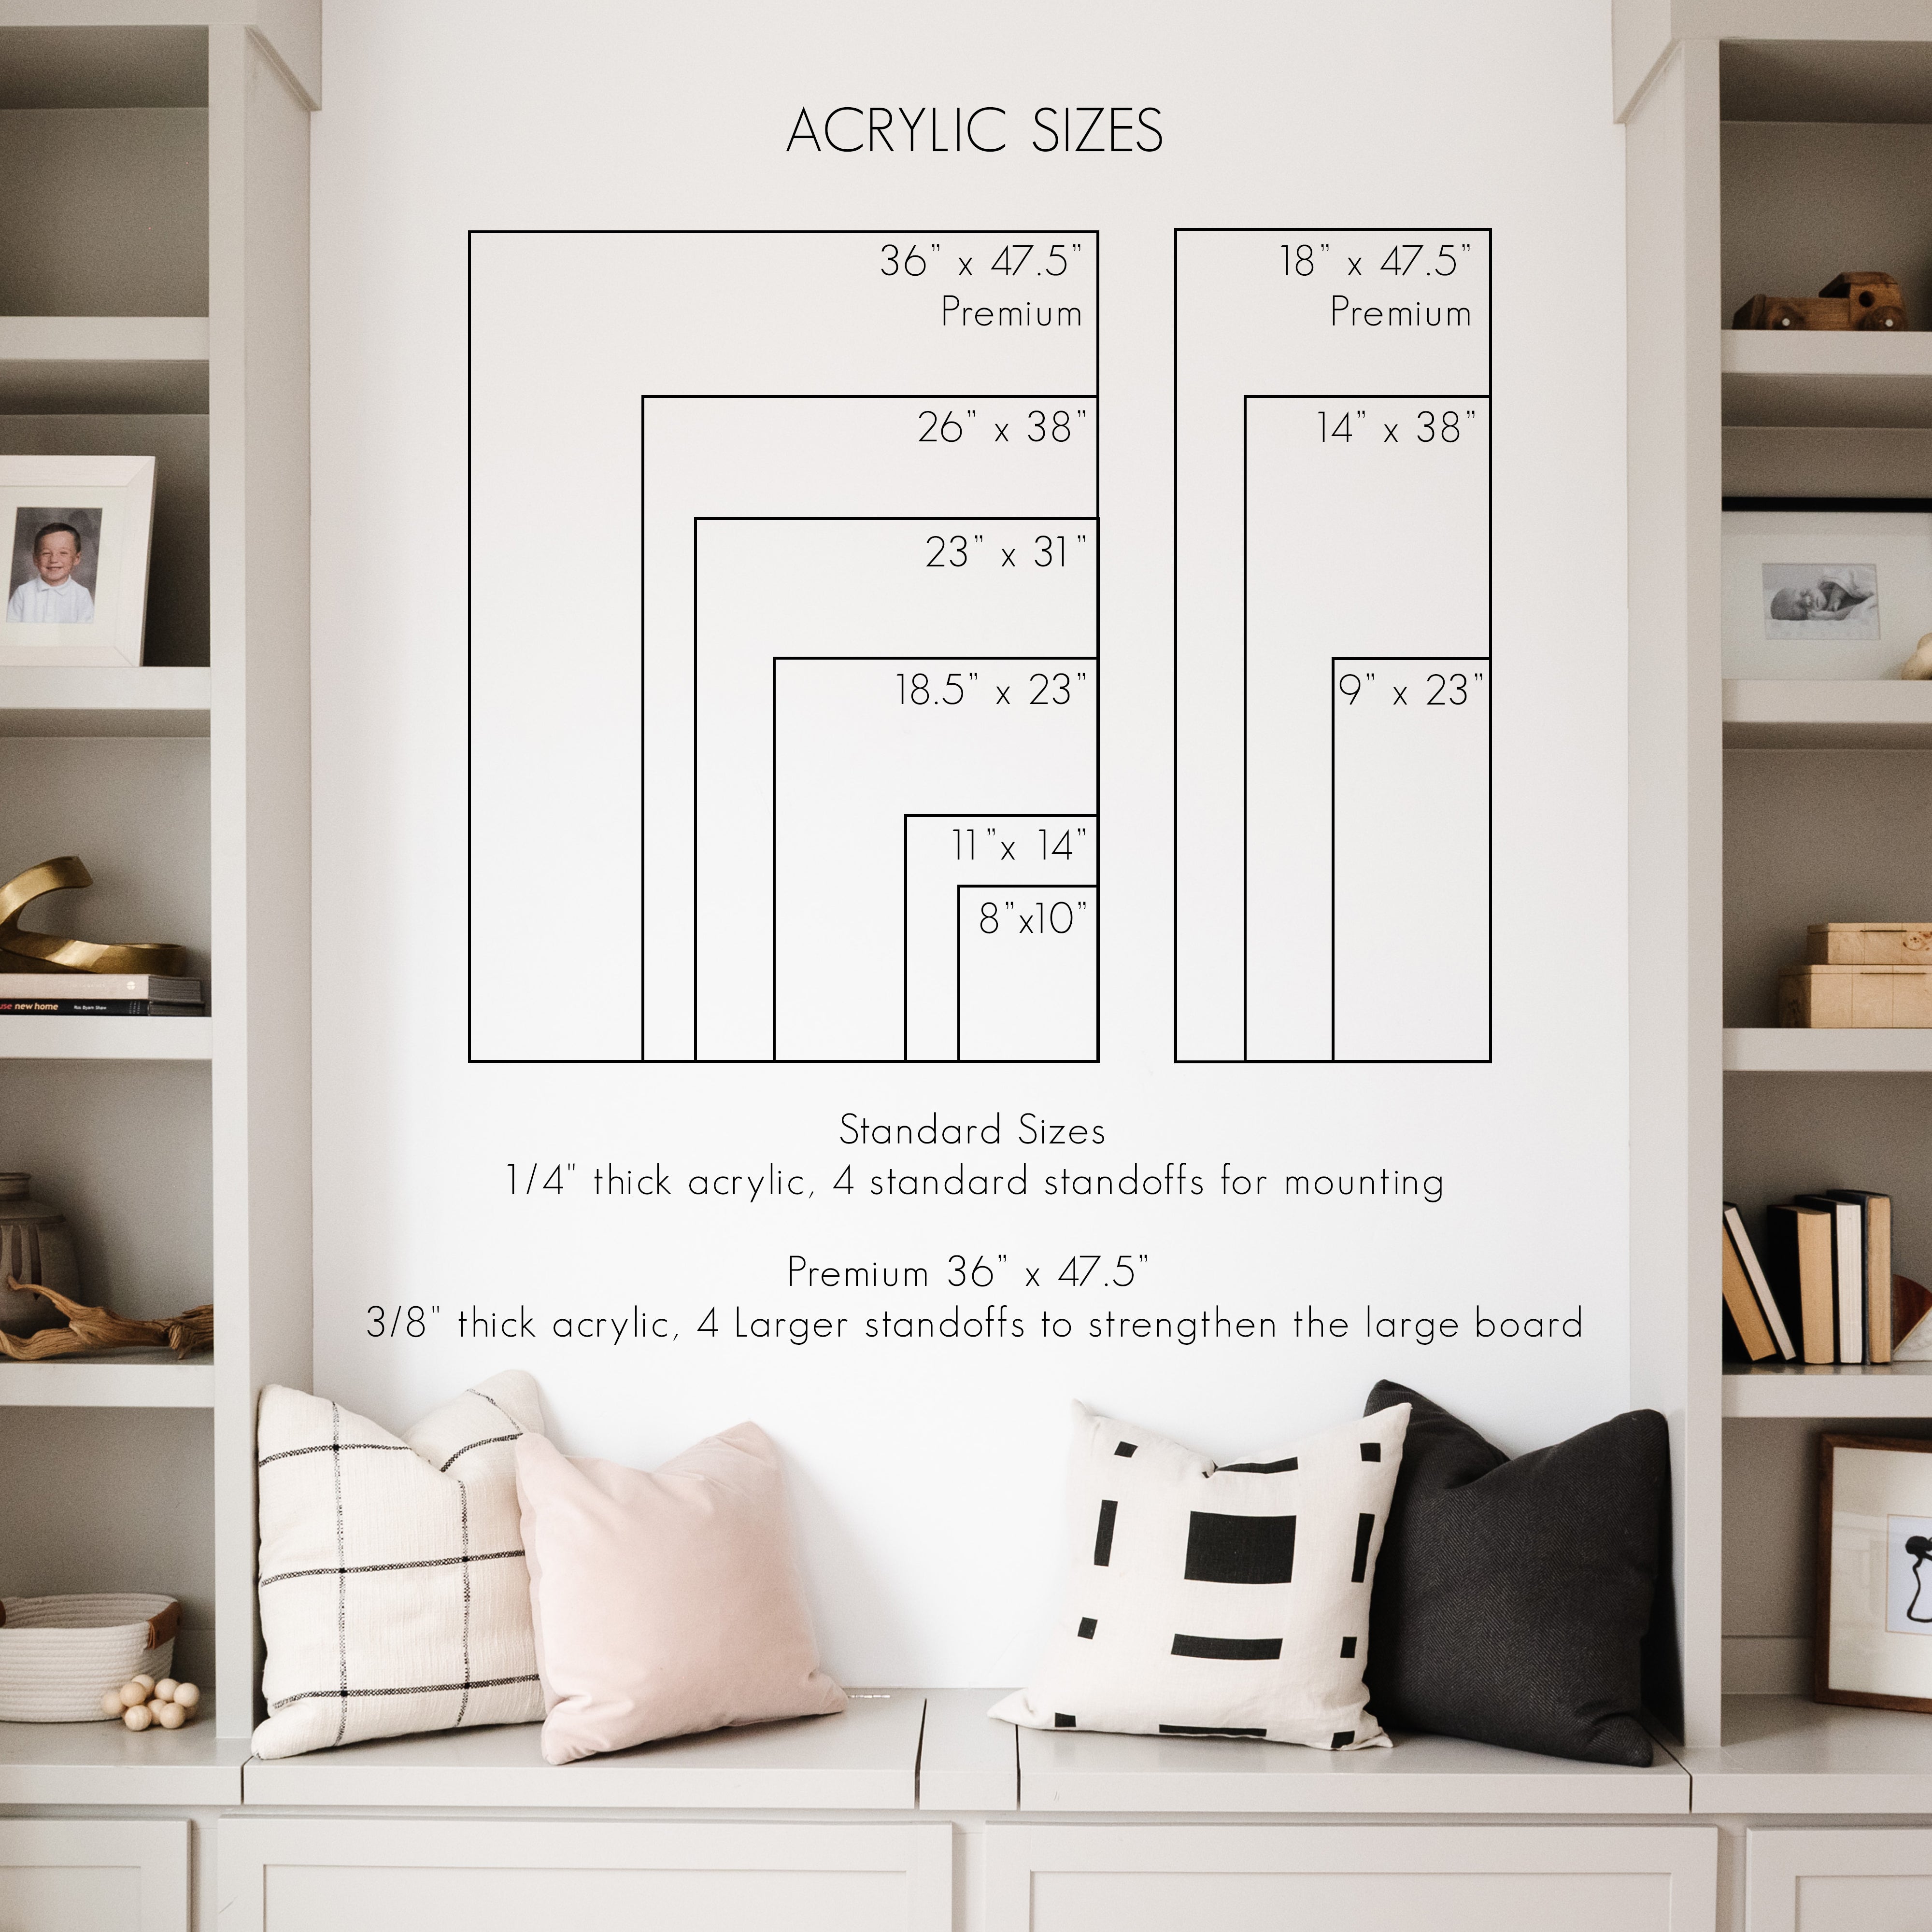 Monthly Frosted Acrylic Calendar + 2 Sections | Vertical Craig